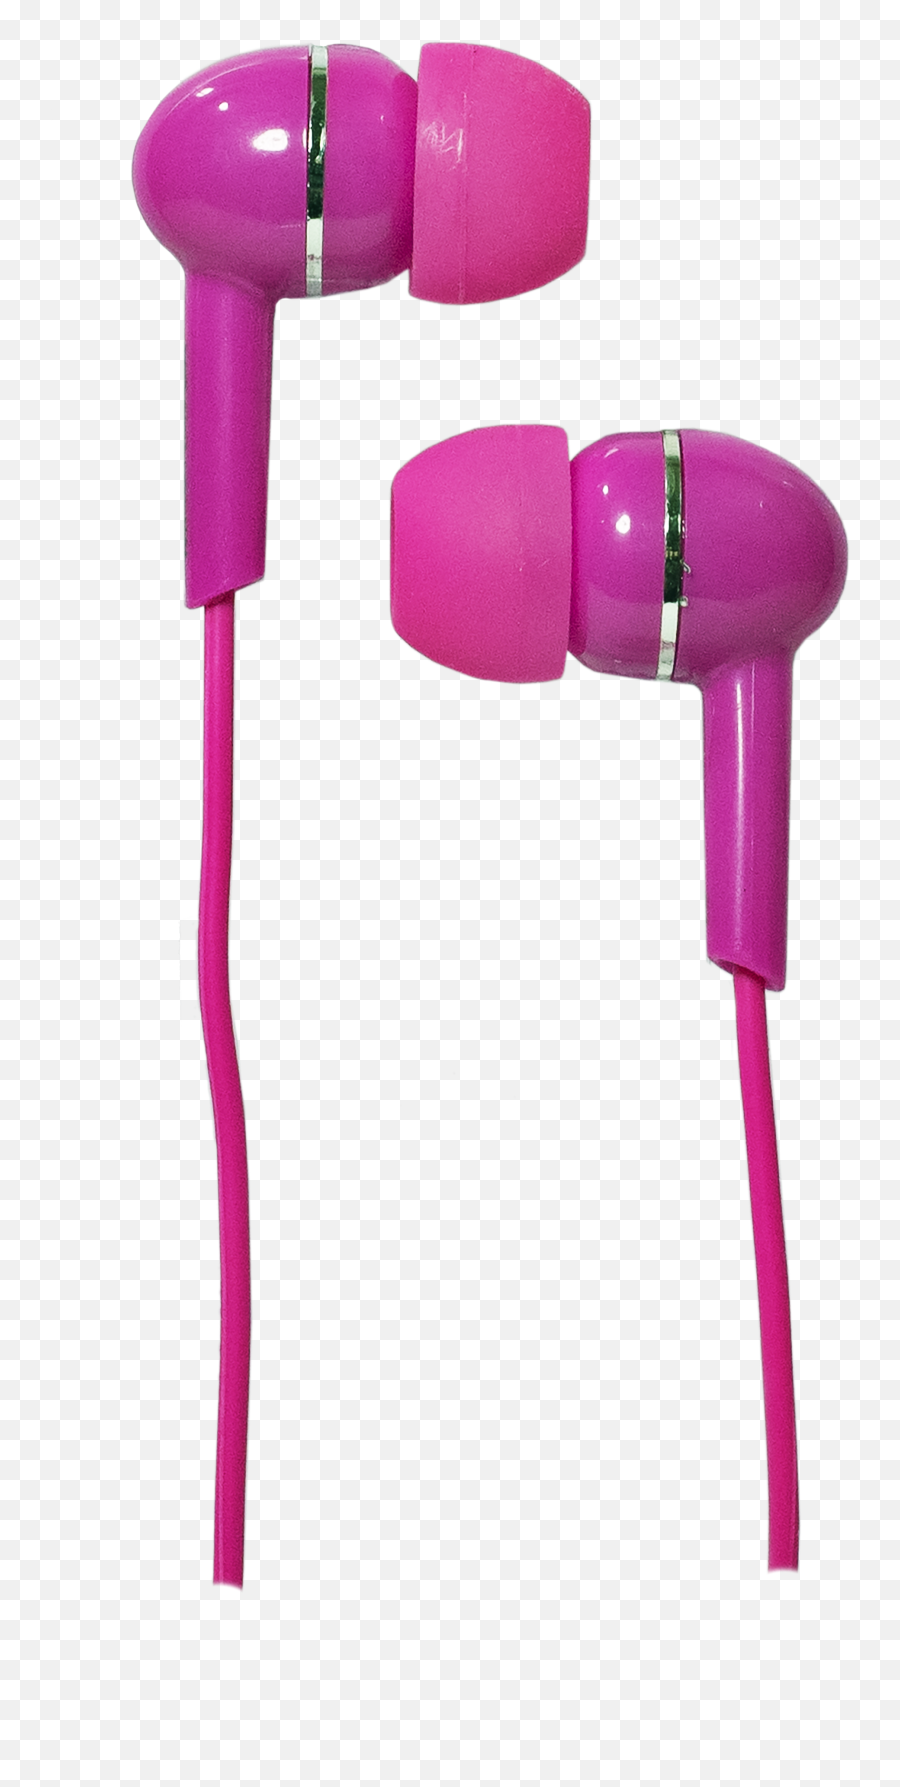 Magnavox Mhp4850 - Pk Ear Buds In Pink Available In Black Blue Pink Purple U0026 White Ear Buds Wired Extra Value Comfort Stereo Earbuds Wired For Teen Png,Jlab Jbuds Air Icon